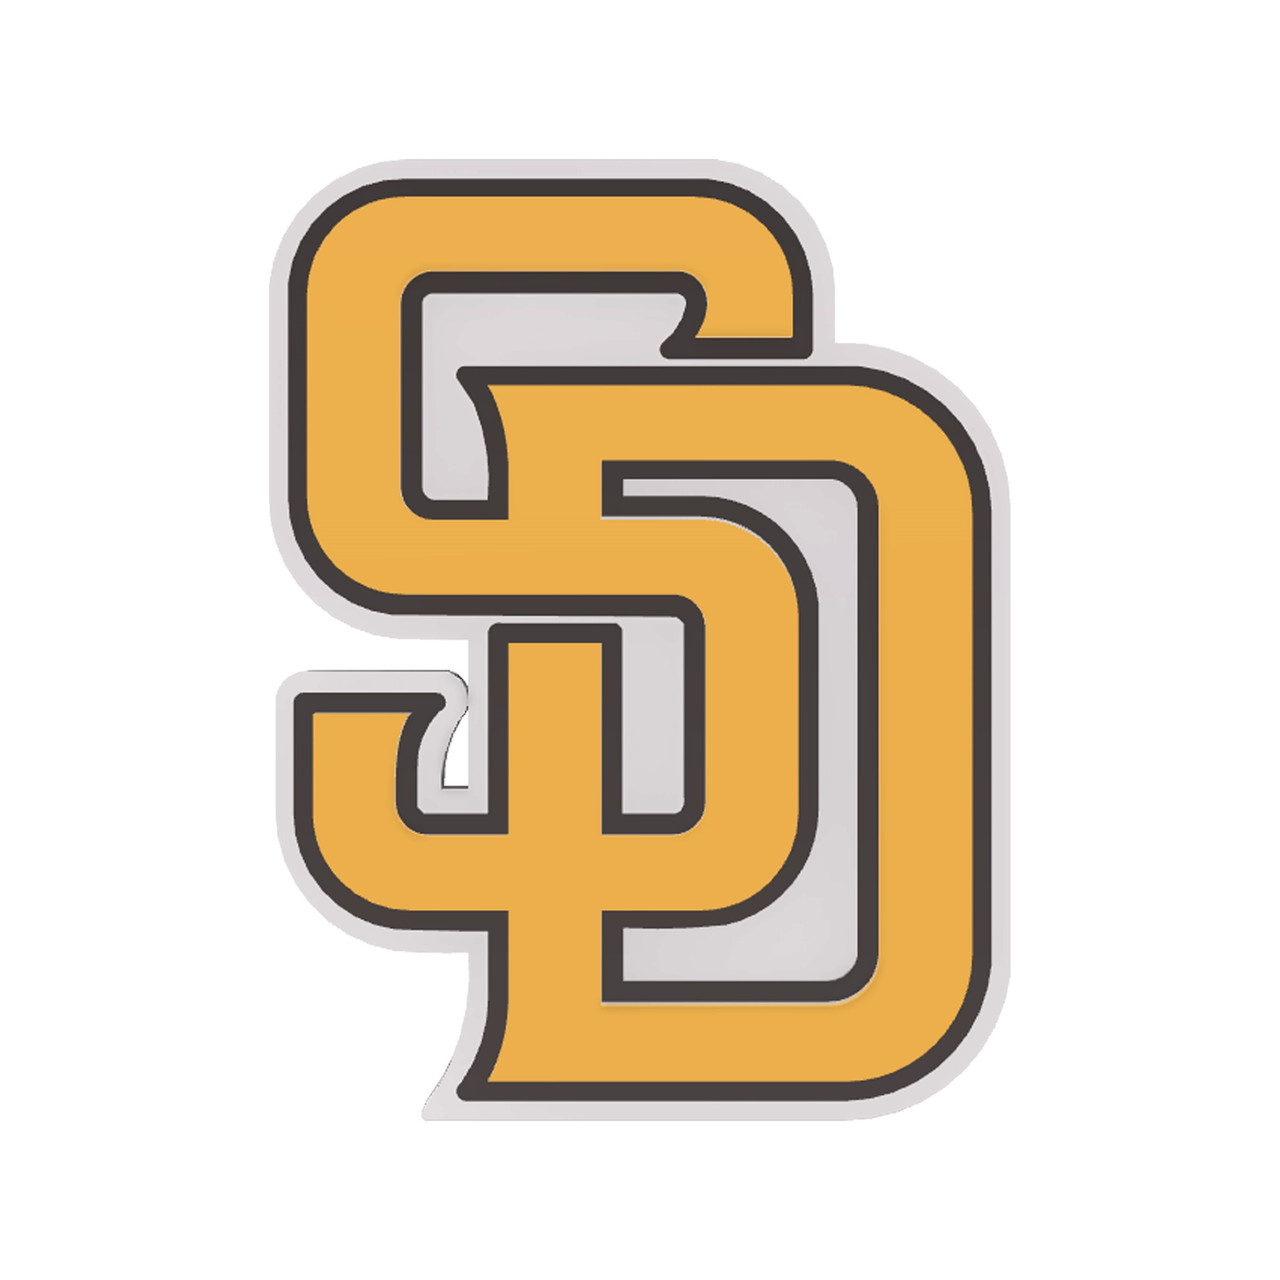 What's Your Sign(ature) - San Diego Padres